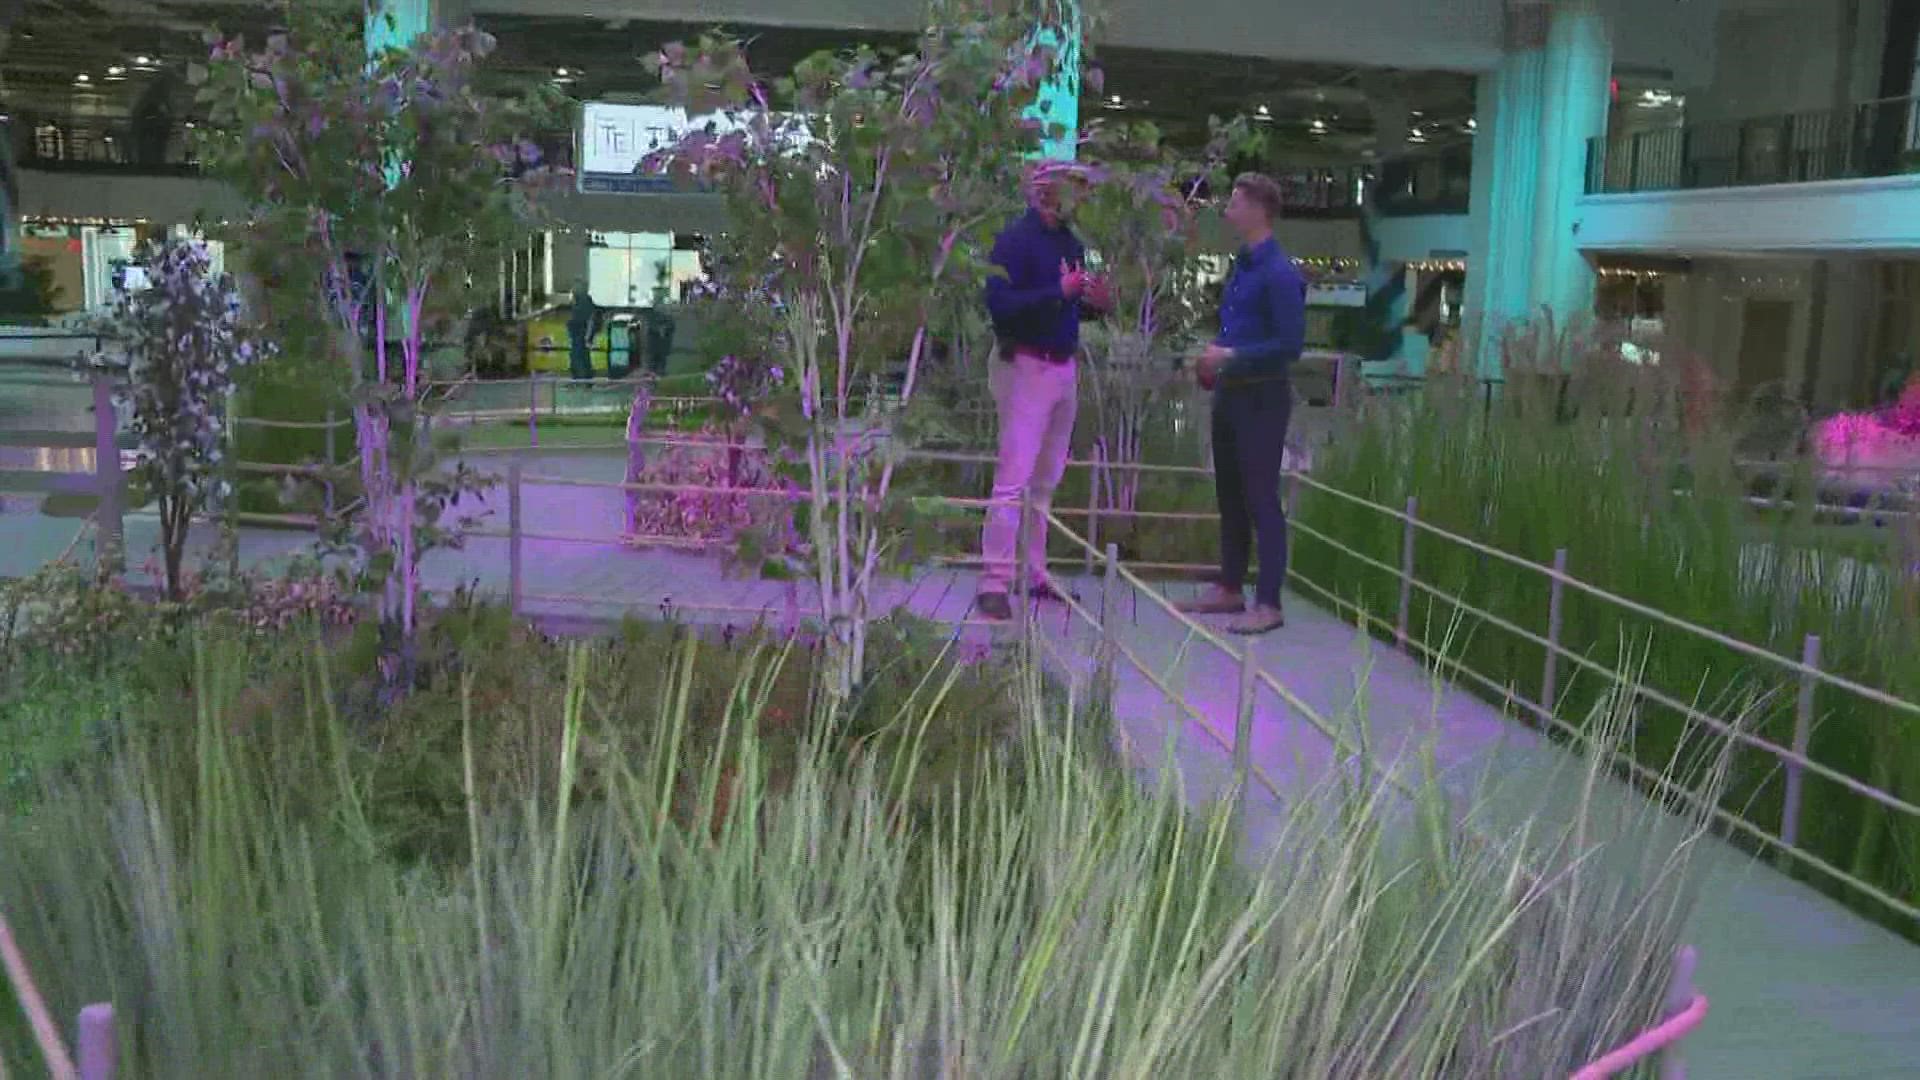 3News' Austin Love has a sneak peek inside the new Skylight Park at Tower City in downtown Cleveland.